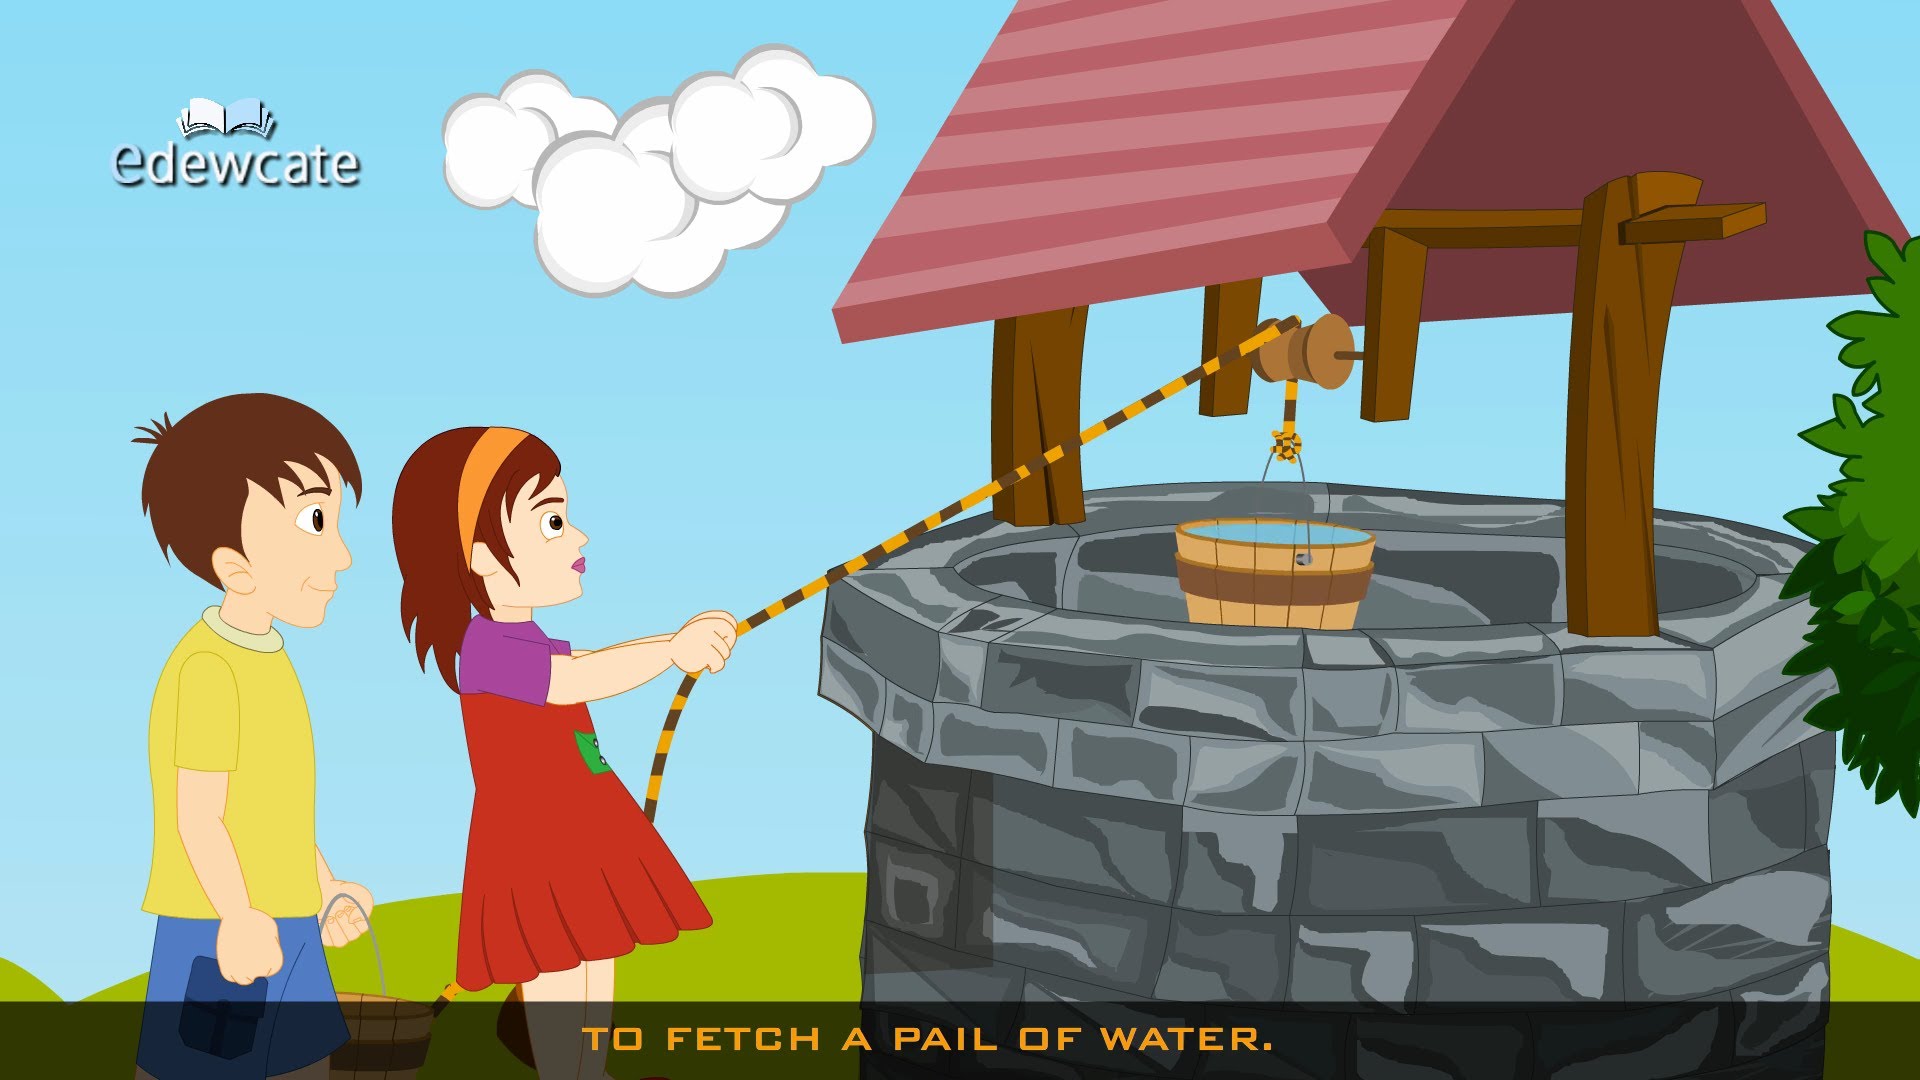 hill clipart jack and jill